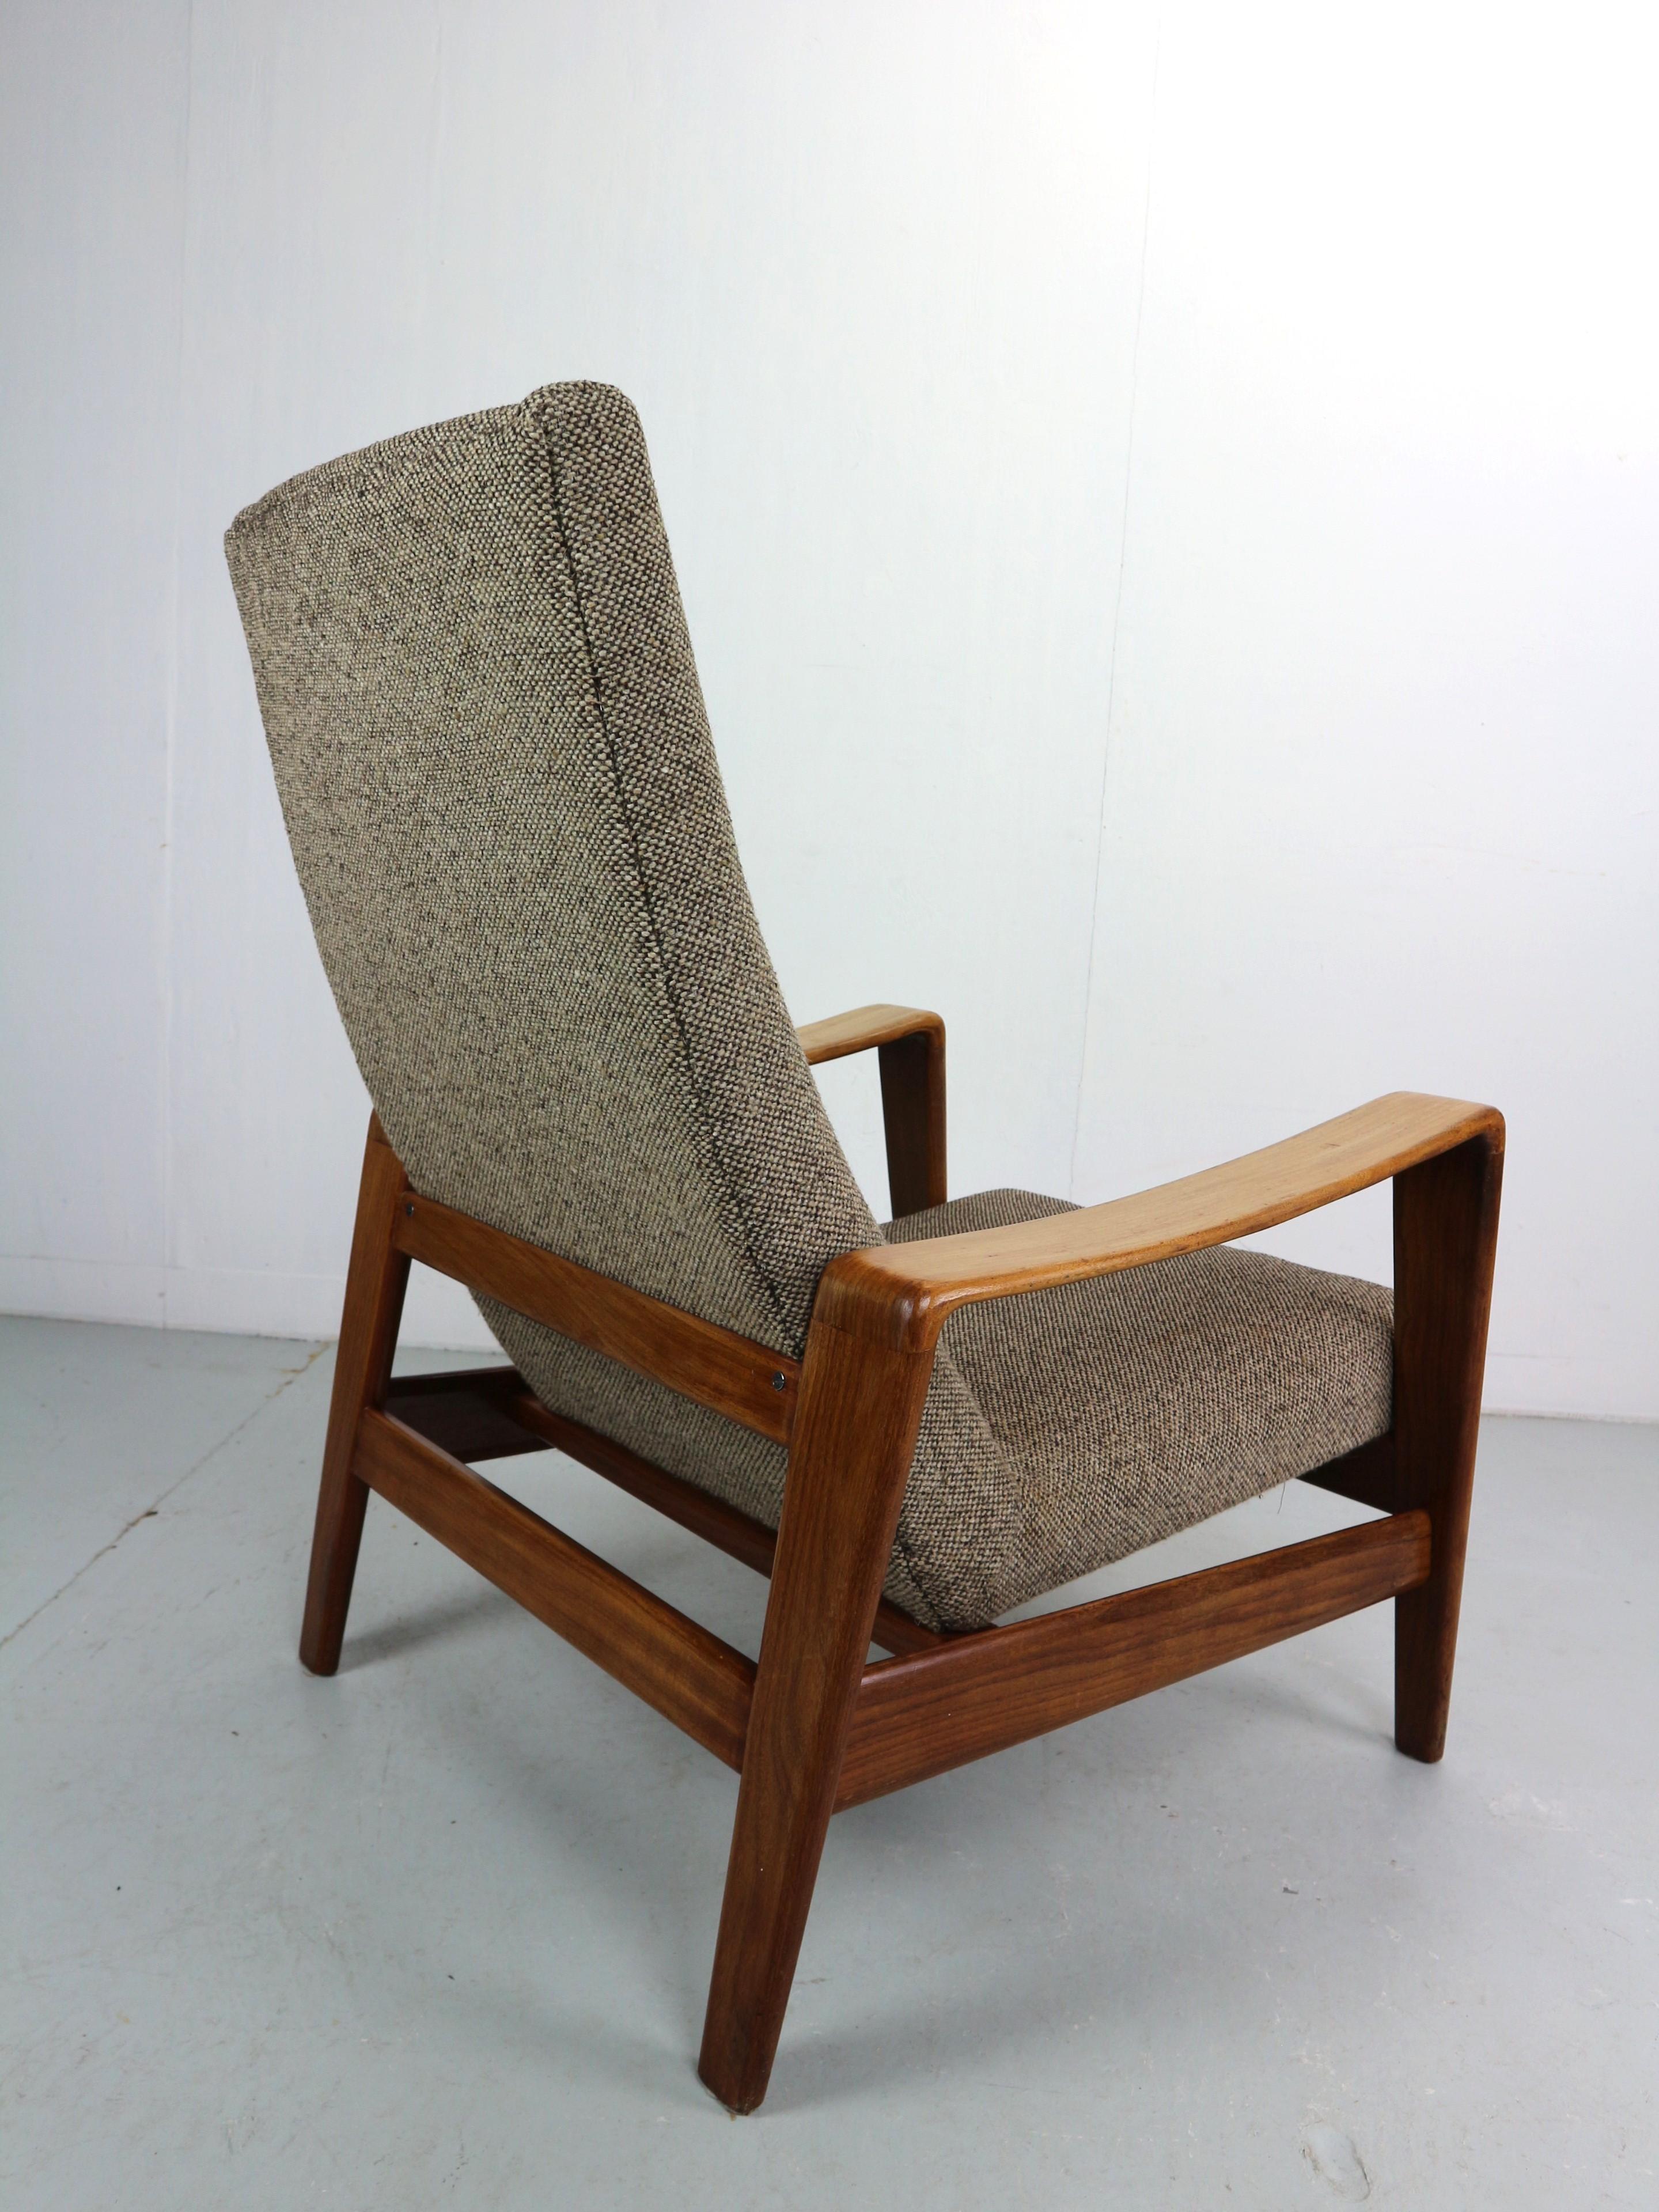 Lounge Chair by Arne Wahl Iversen for Komfort, 1960s In Good Condition For Sale In The Hague, NL